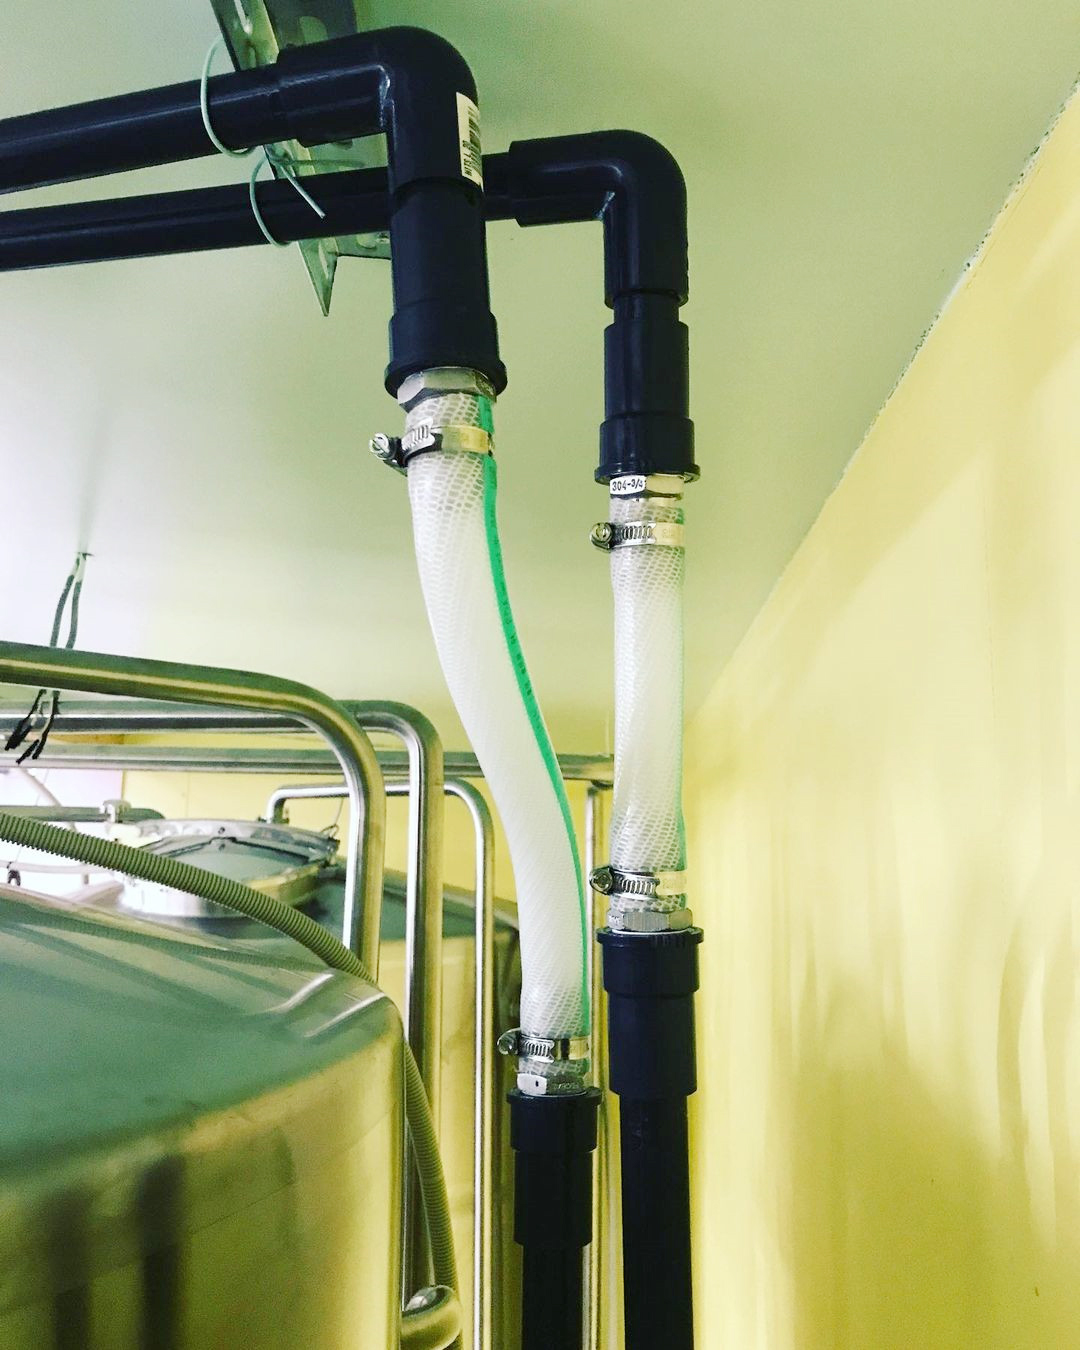 Japan 1200L brewery system installation (5)